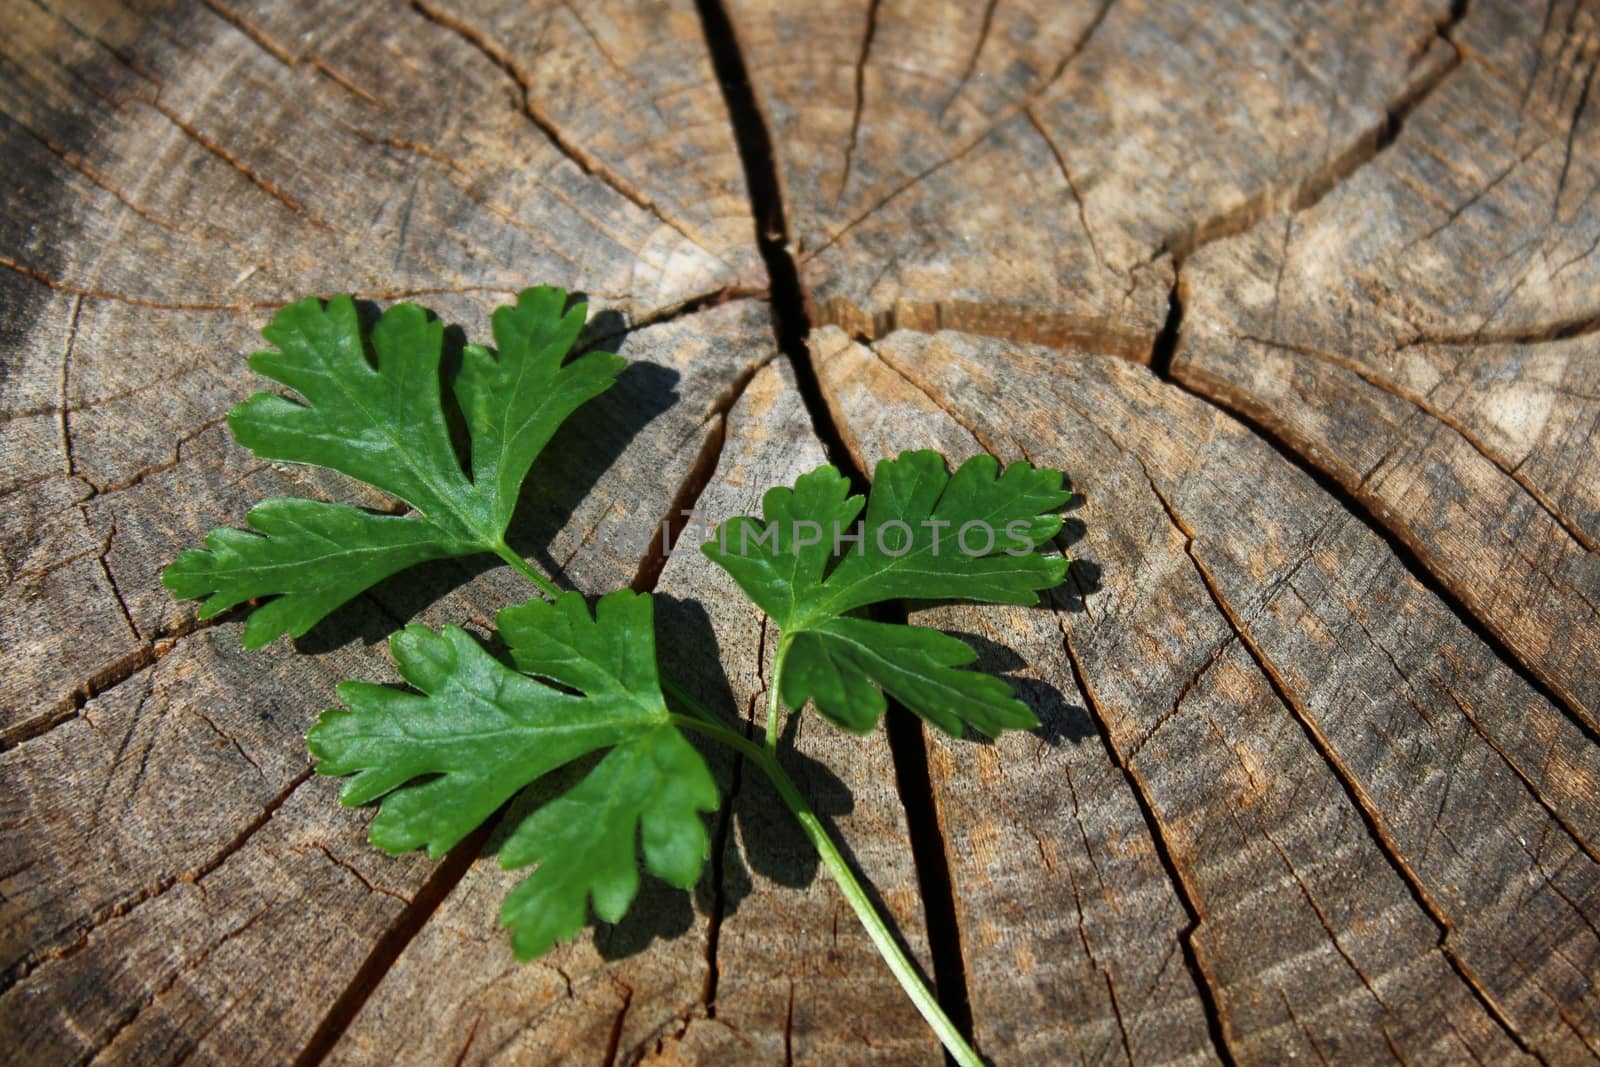 The picture shows parsley on an old wood.